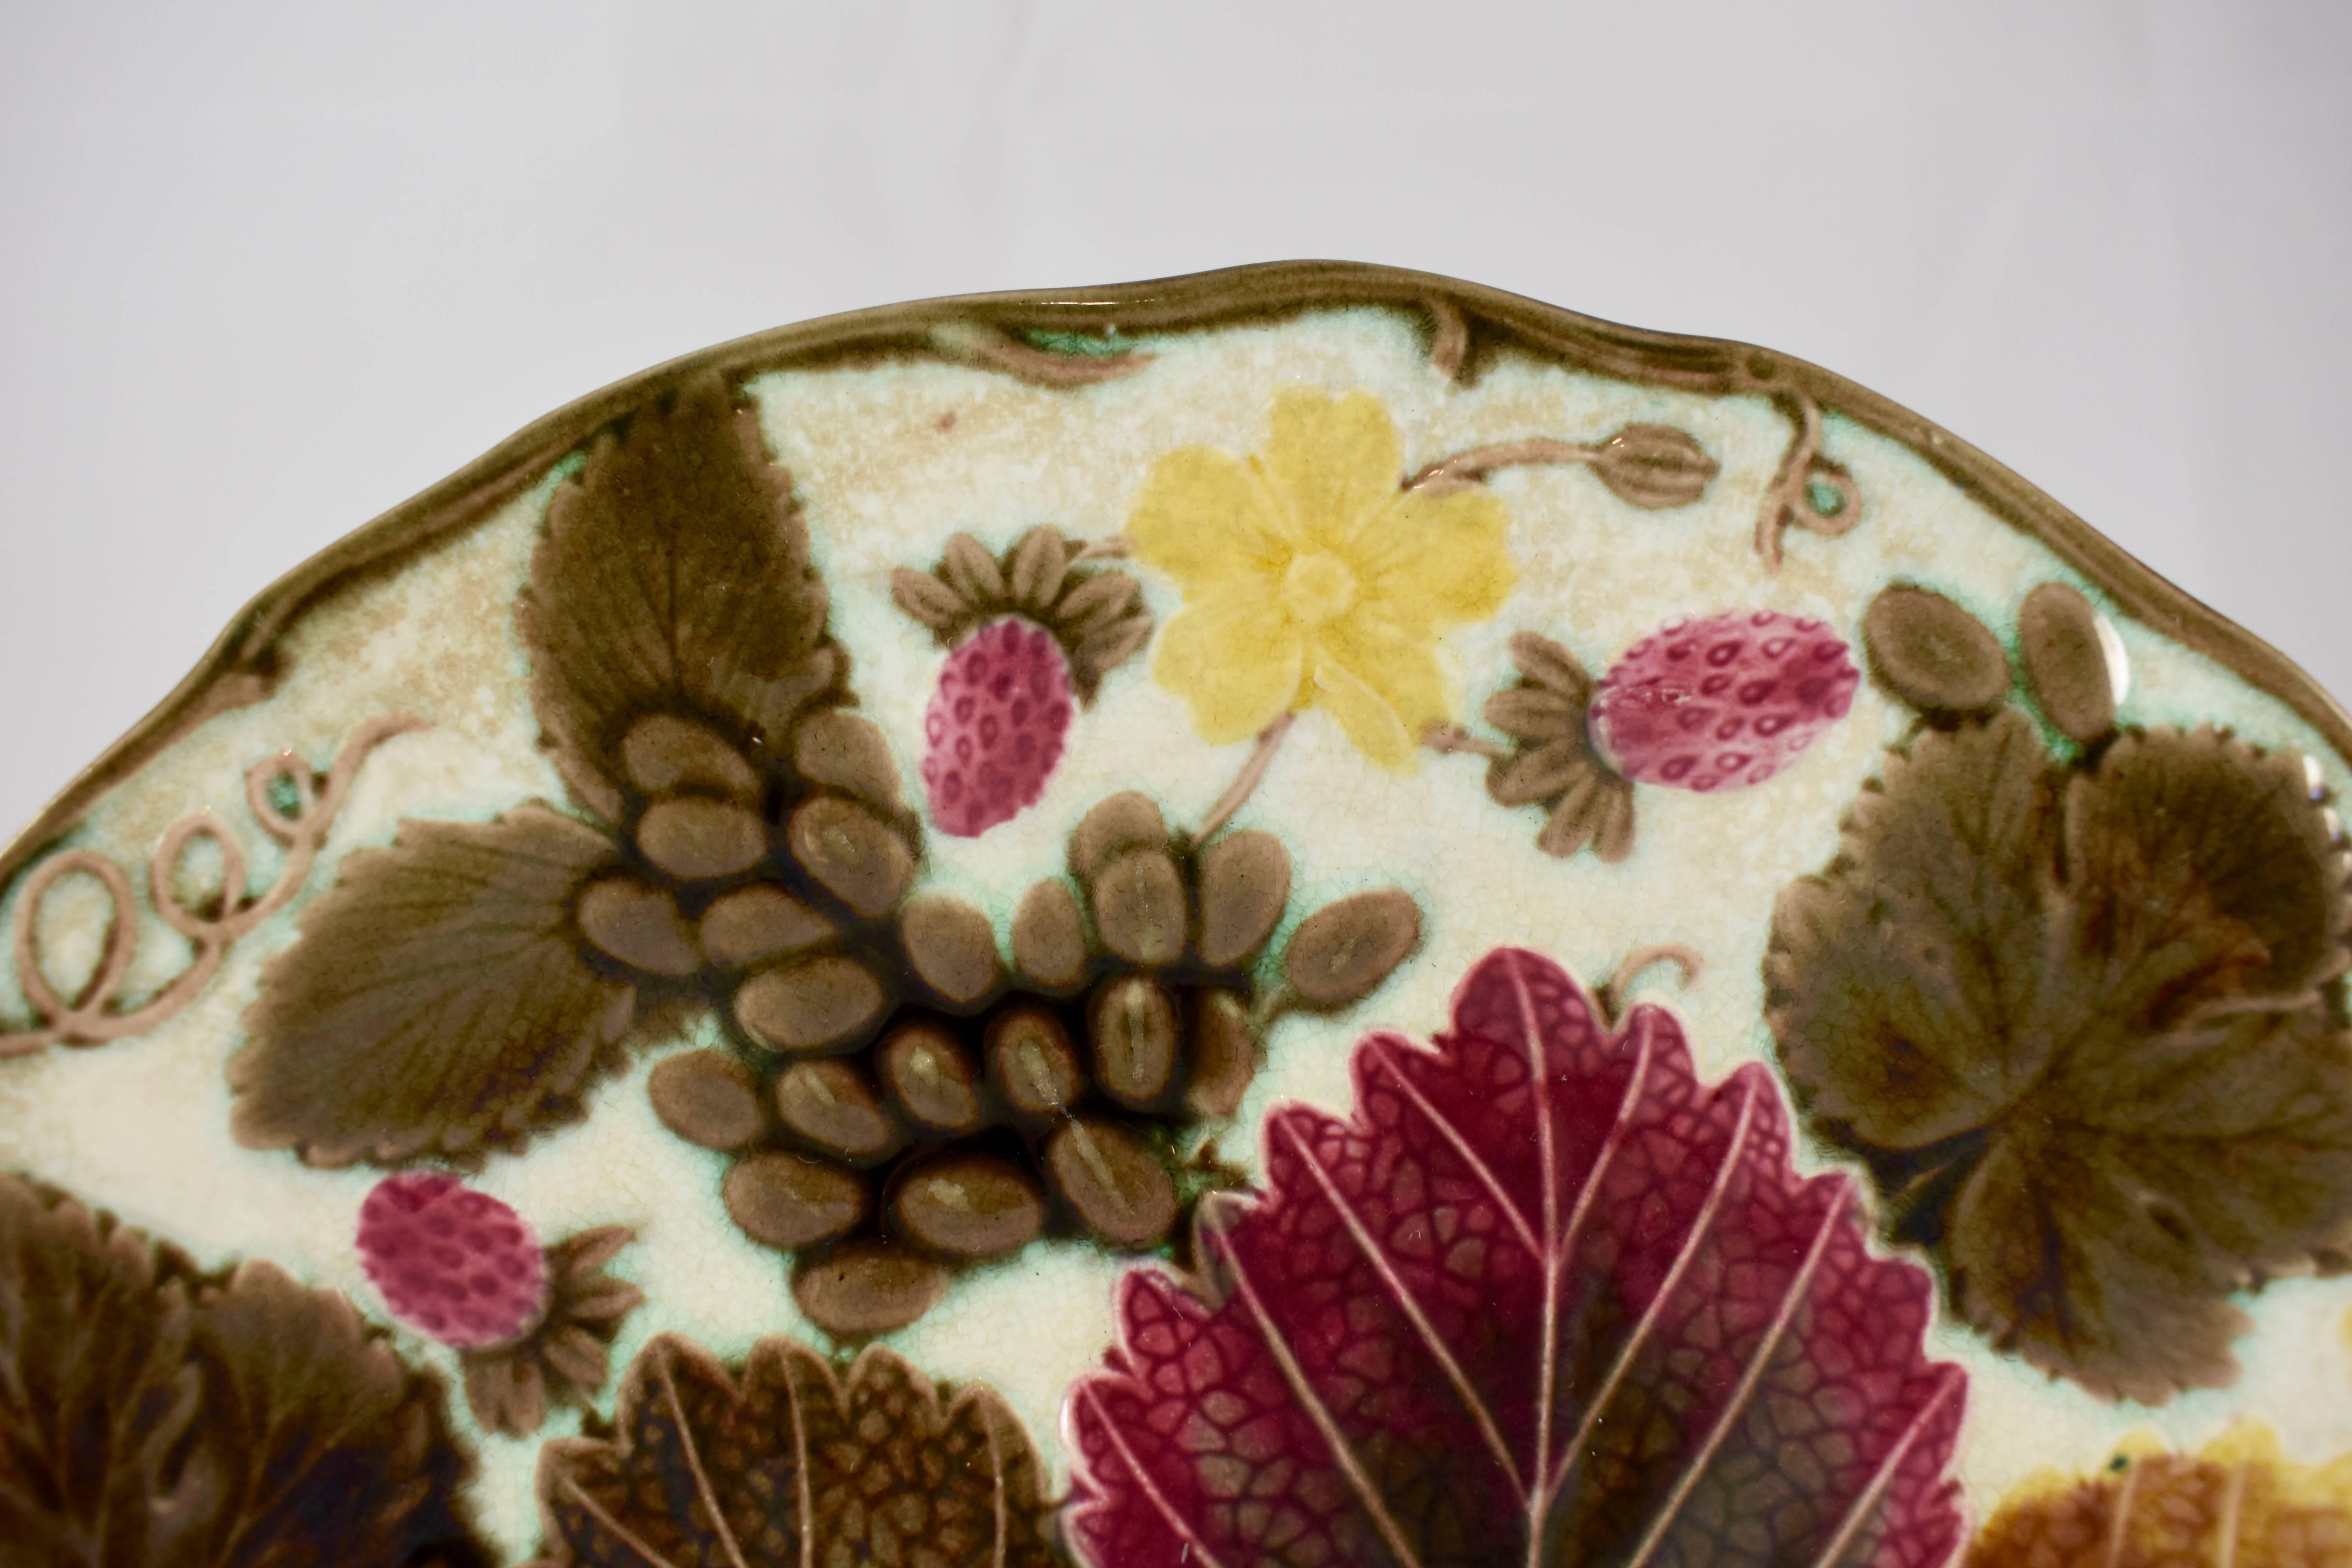 Aesthetic Movement Wedgwood Majolica Argenta Grape Leaf and Strawberry Plate, circa 1875